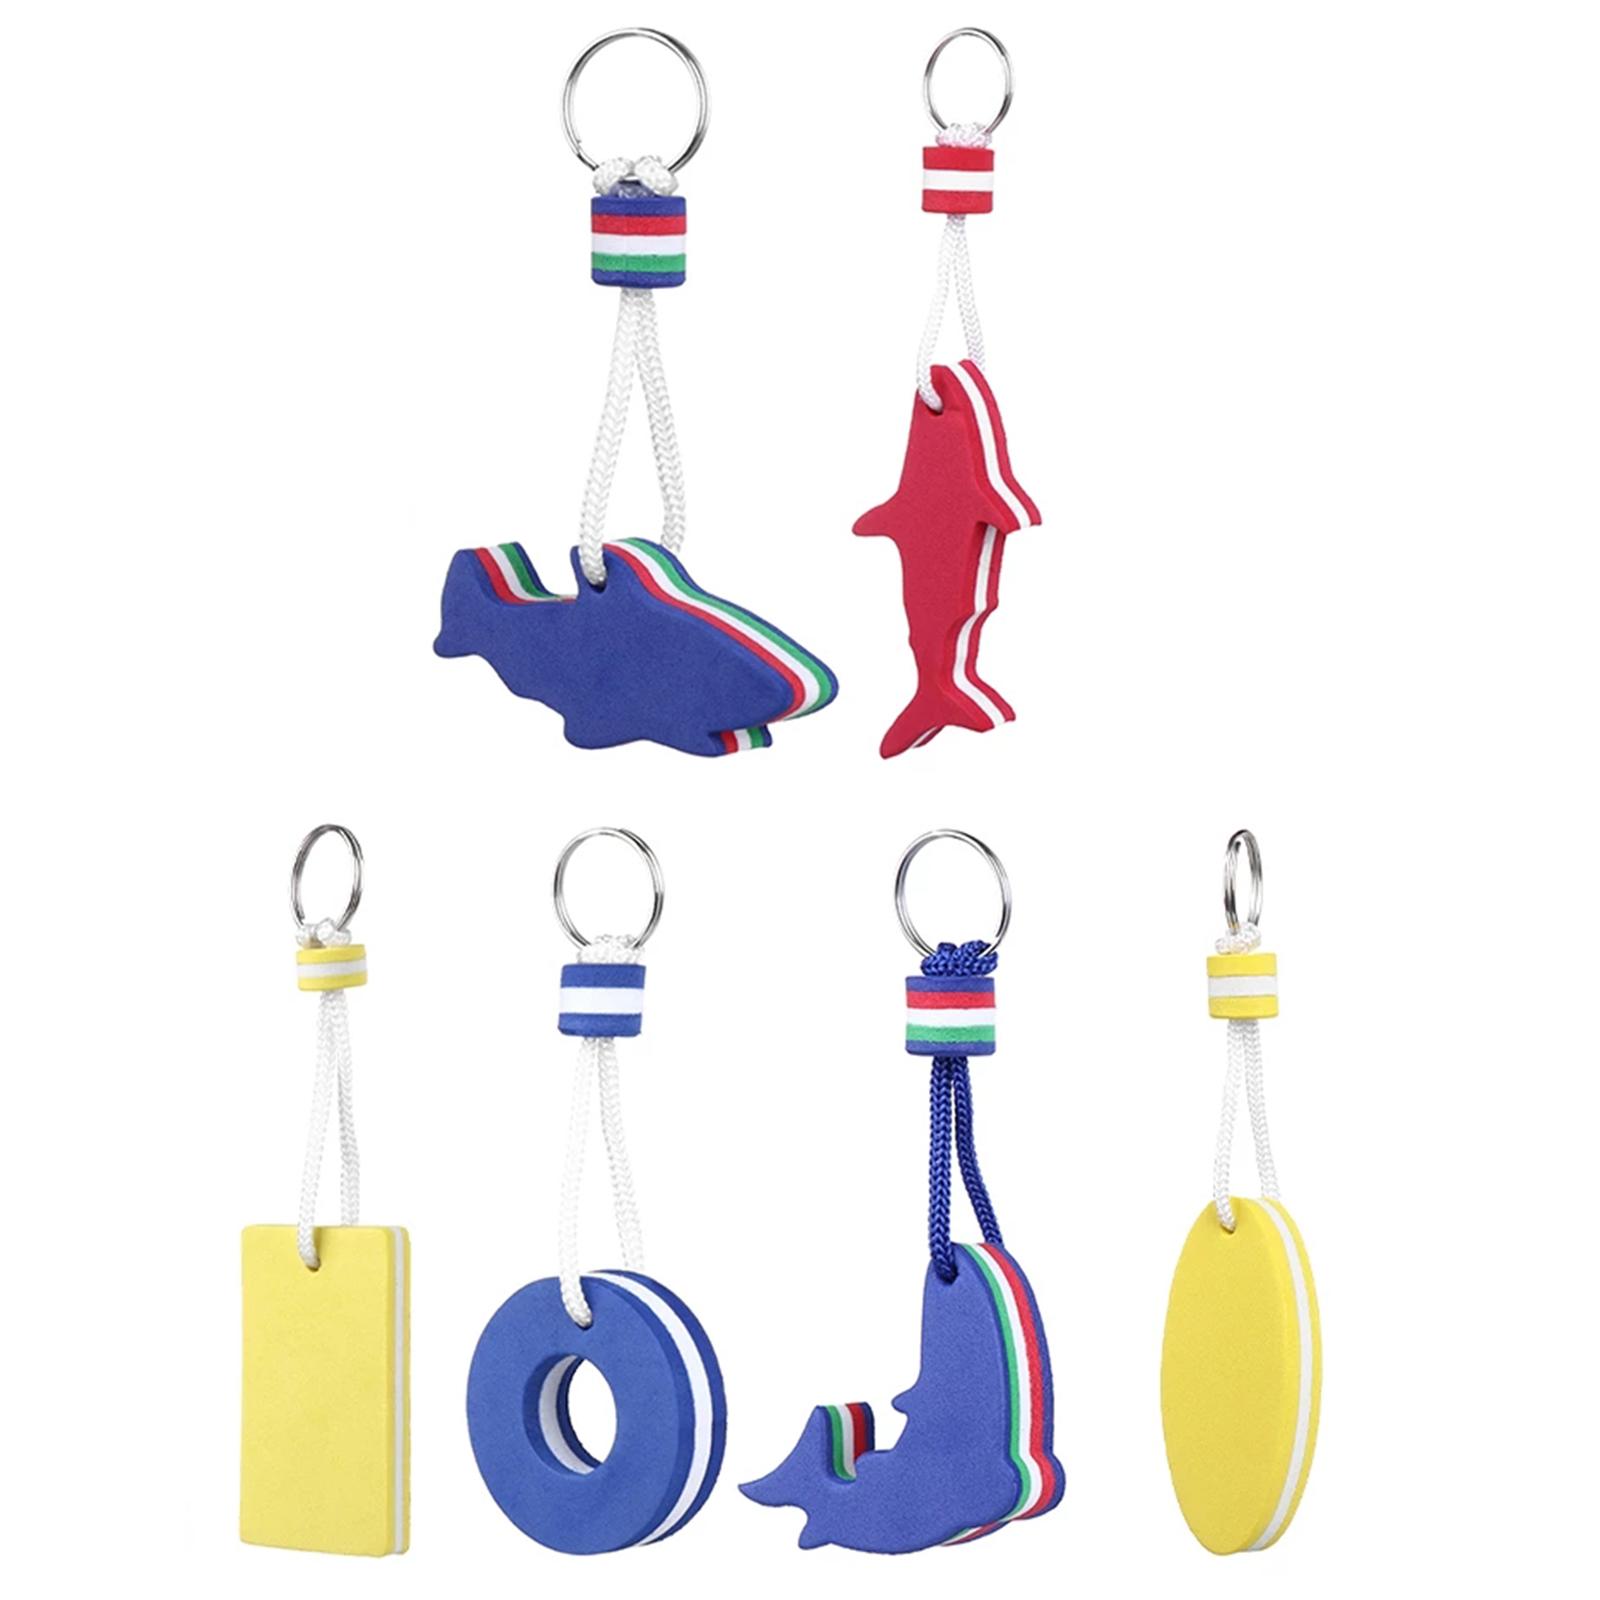 6x Floating Keychains Floatable Key Chain for Water Sports Swimming Sailing